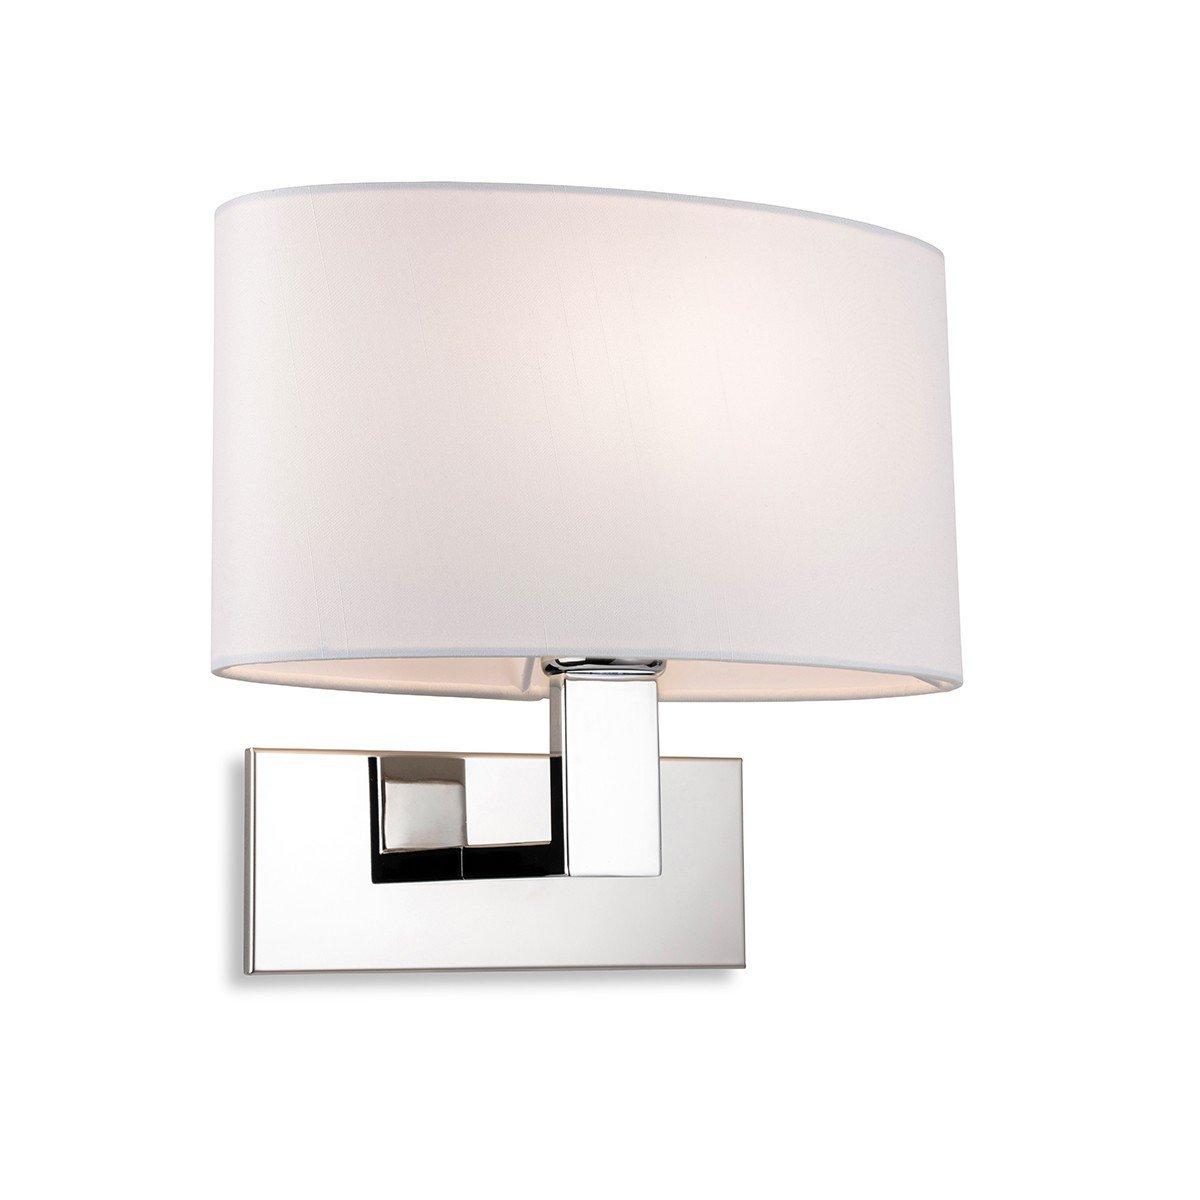 Webster Wall Lamp Chrome with Oval Cream Shade